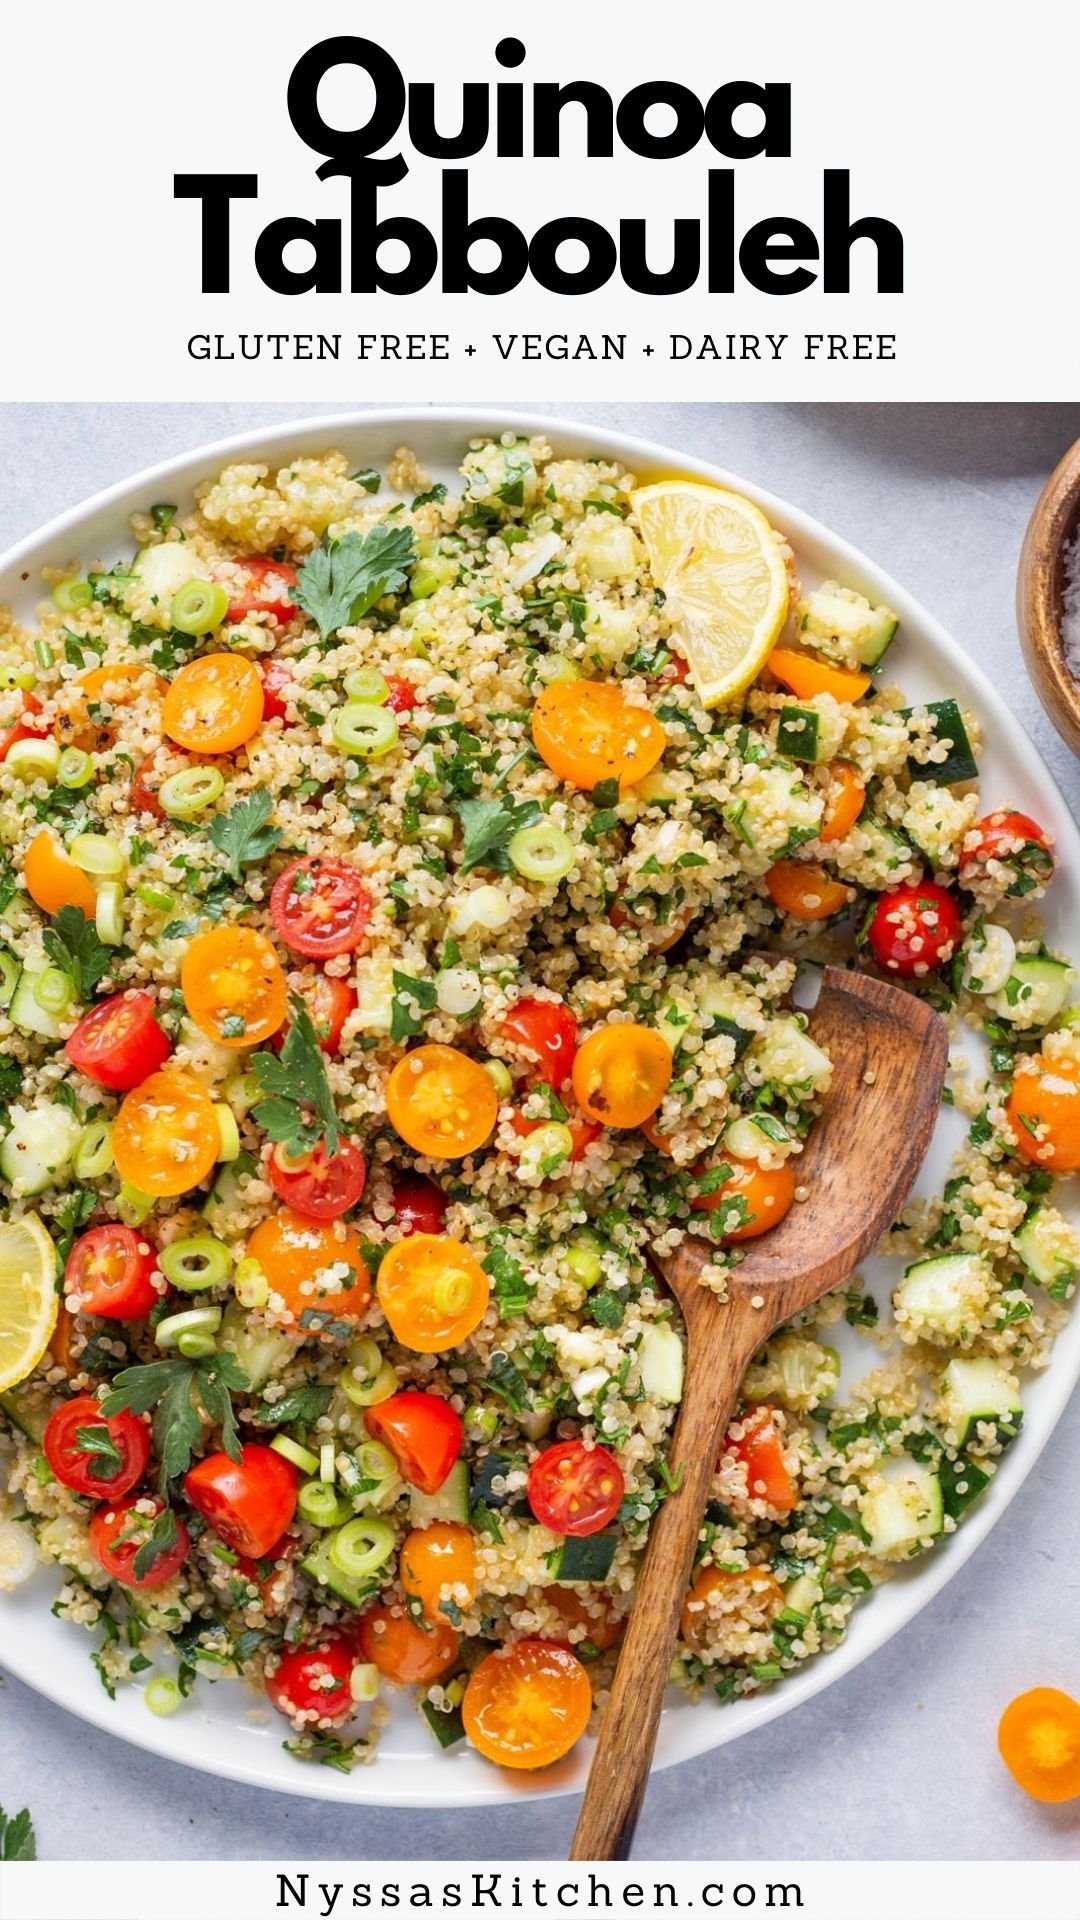 This quinoa tabbouleh salad is such a fresh and flavorful gluten free version of a classic tabbouleh recipe! Made with fluffy quinoa, sweet cherry tomatoes, crisp cucumber, green onions, aromatic parsley, and a bright and simple lemony dressing. Gluten free, vegan, dairy free, & so tasty!